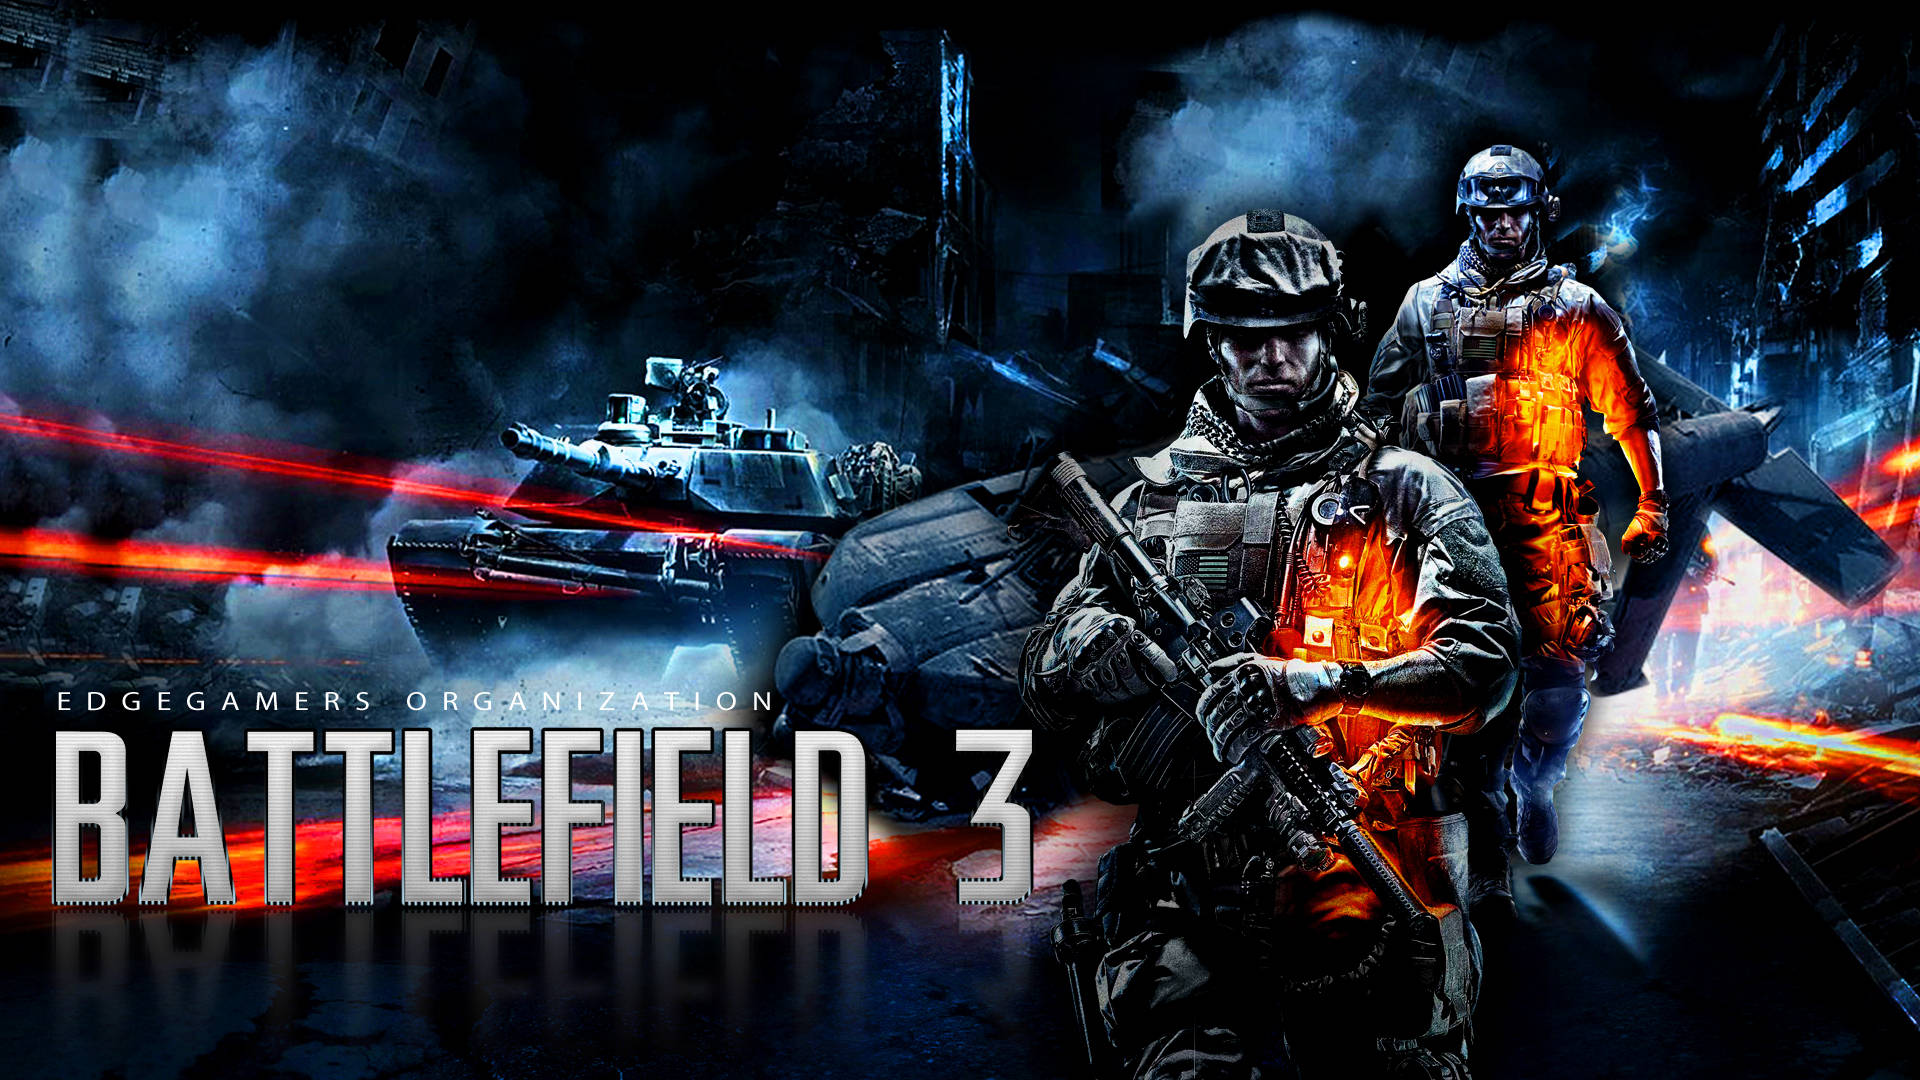 Battlefield 3 Abstract Poster